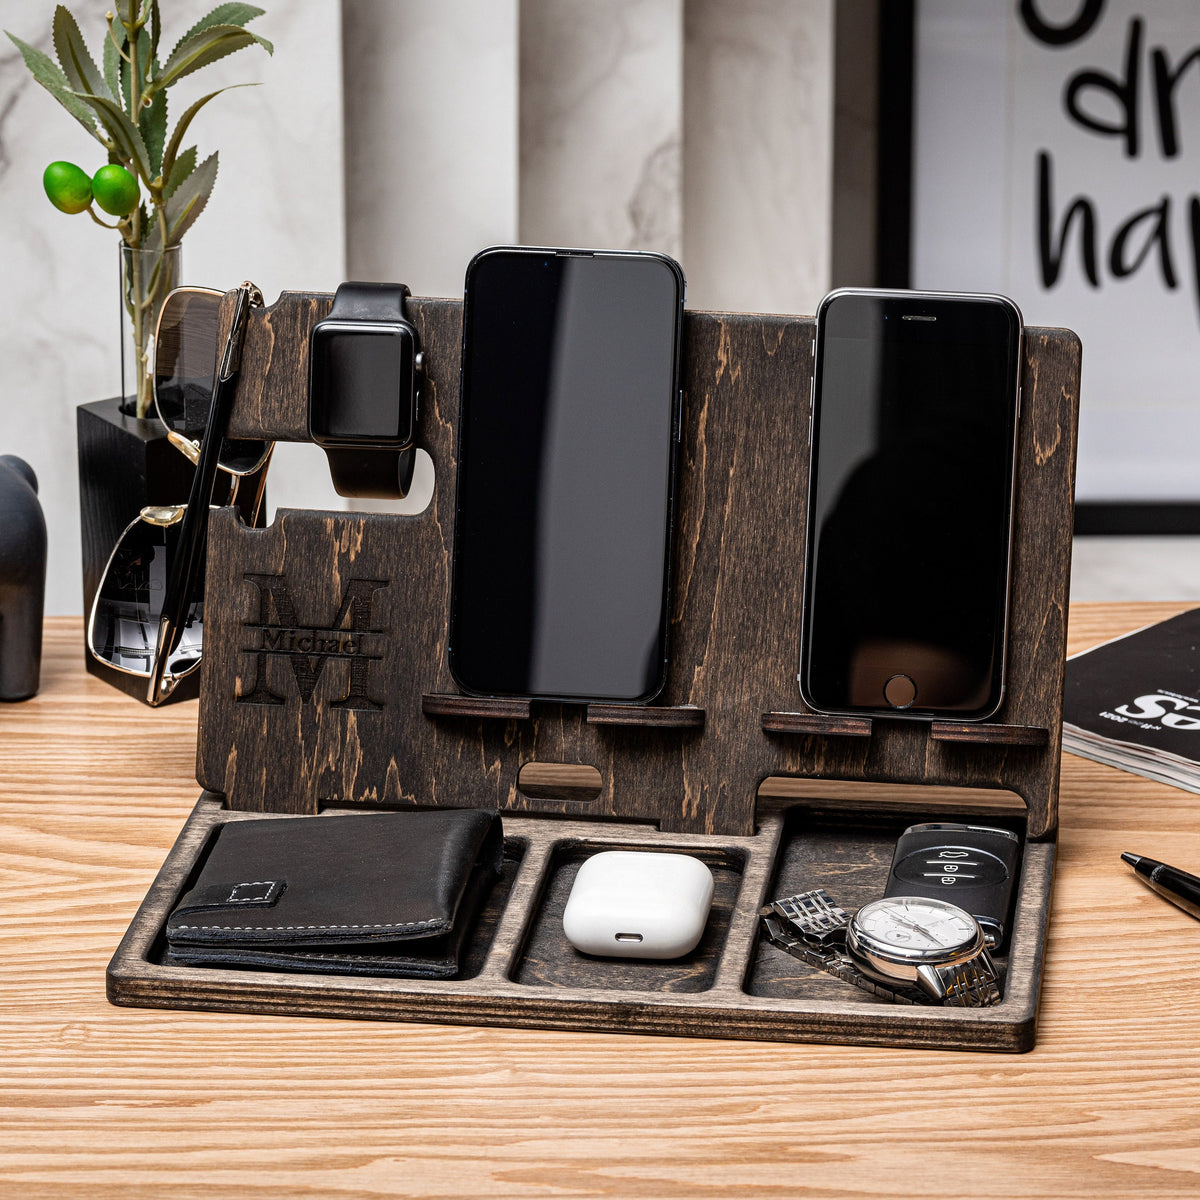 Personalized Phone Charging Docking Station, Desk Organizer for iPhone and Android, Christmas Gift, Modern Design, Gift for Men